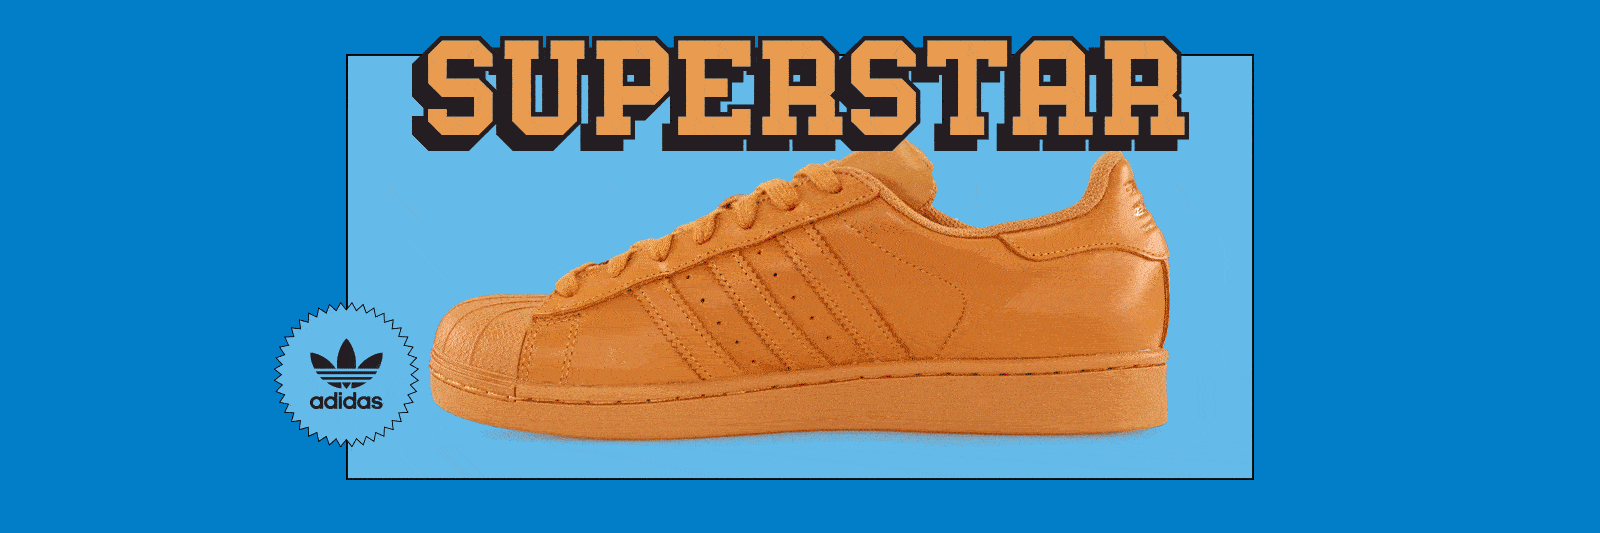 THE ADIDAS SUPERSTAR: 50 YEARS OF CREATOR CULTURE